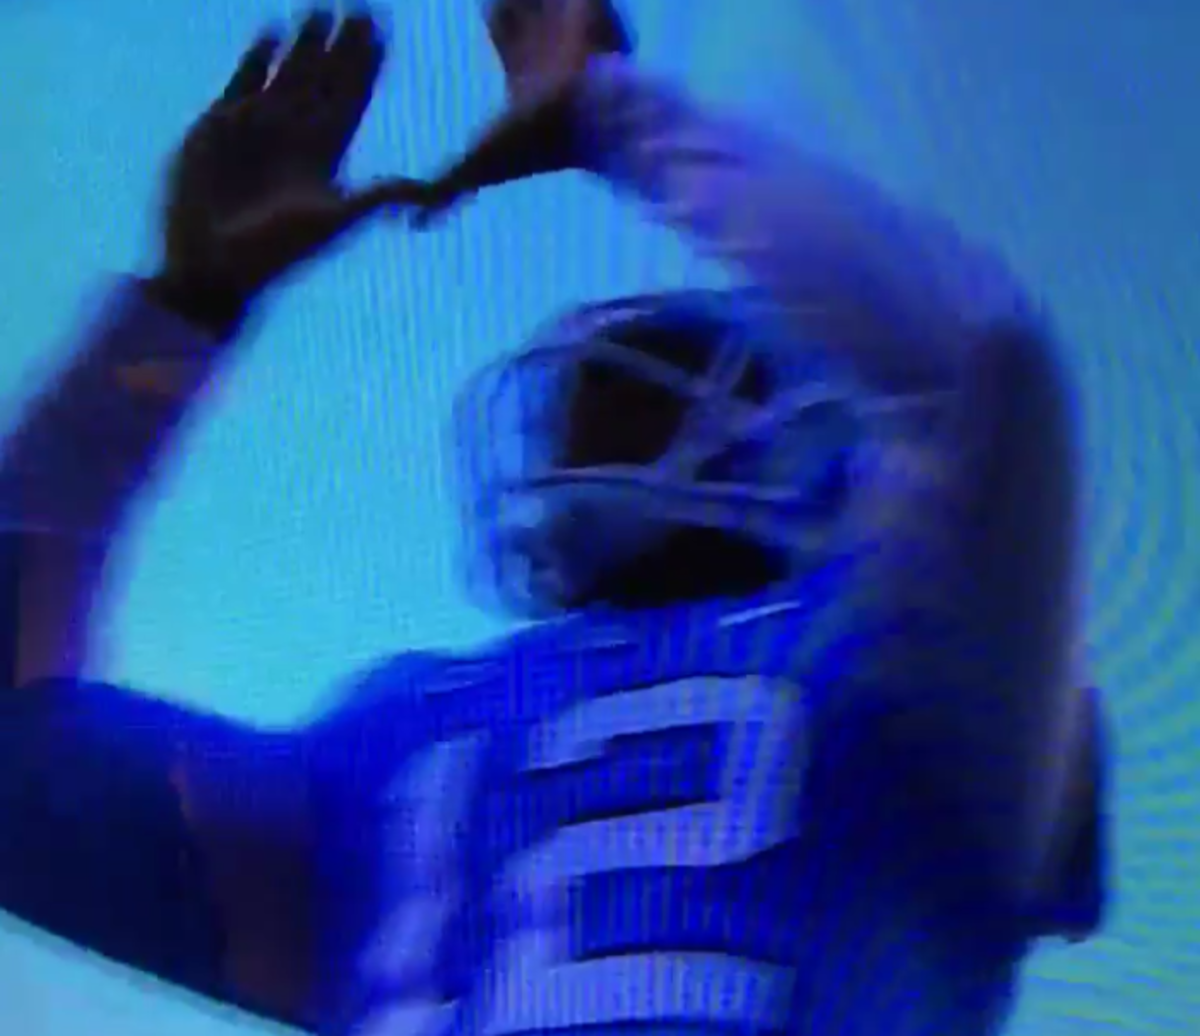 Marquise Williams throws up the "U".